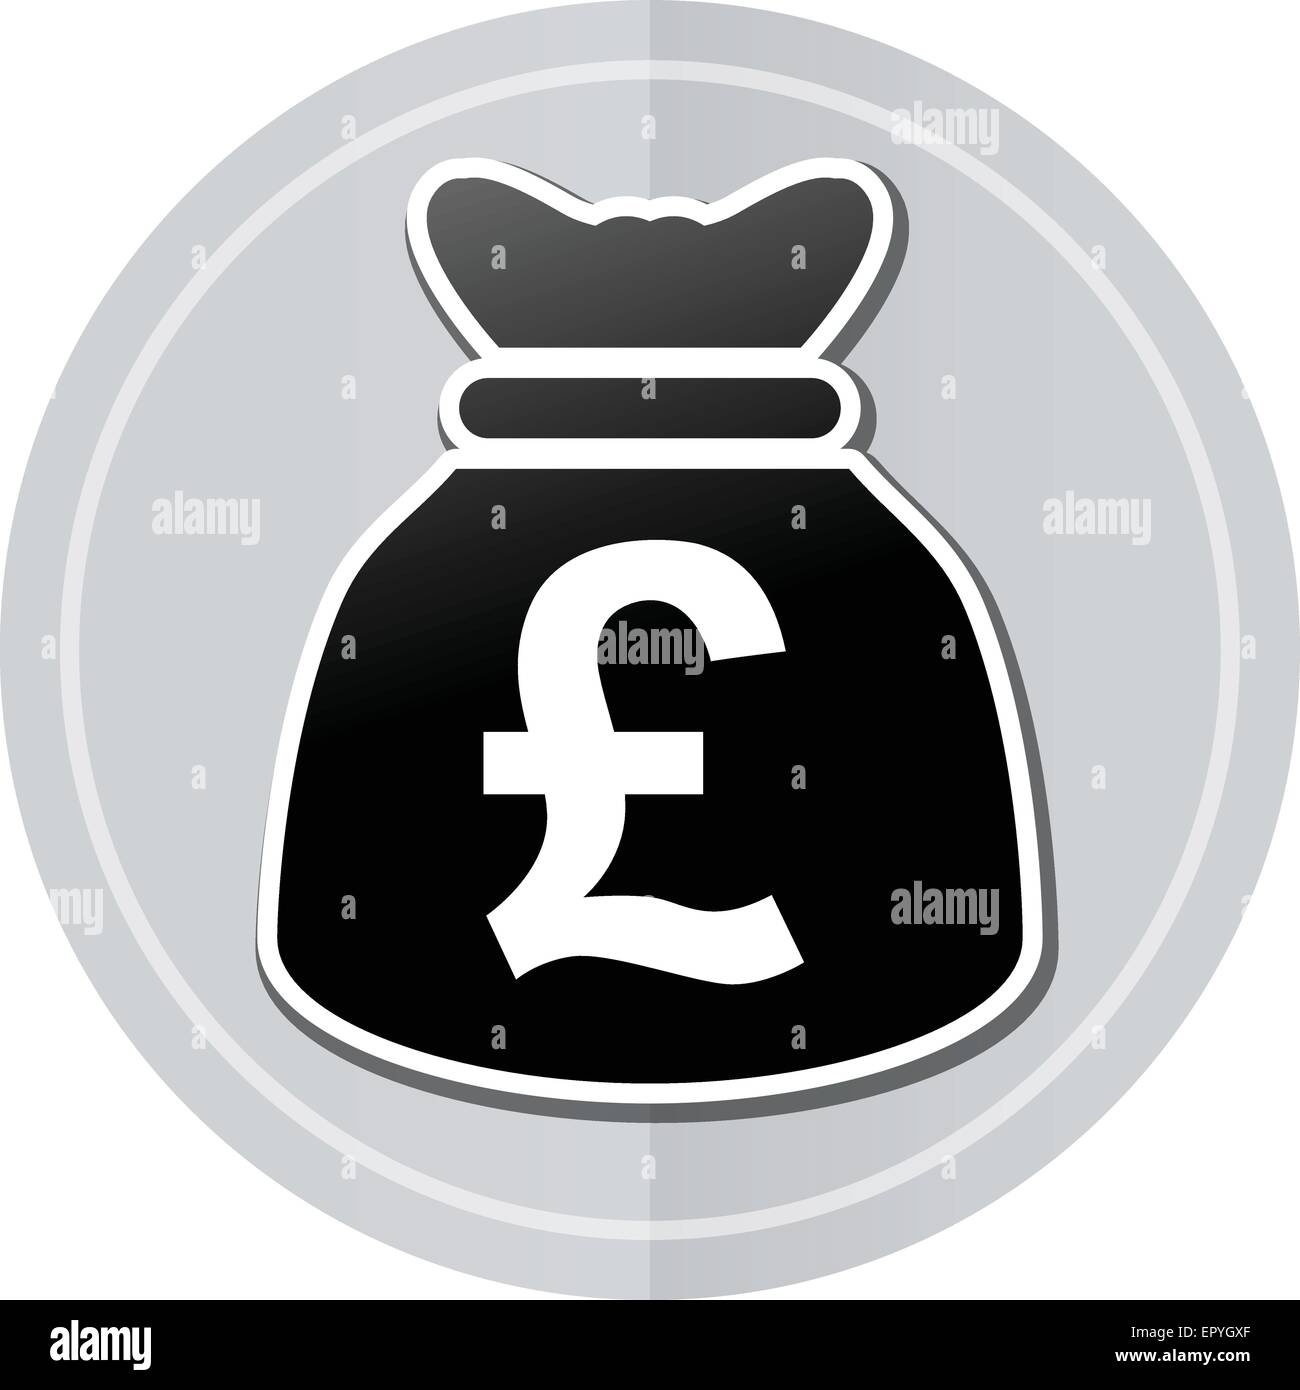 Illustration of pounds bag sticker icon simple design Stock Vector